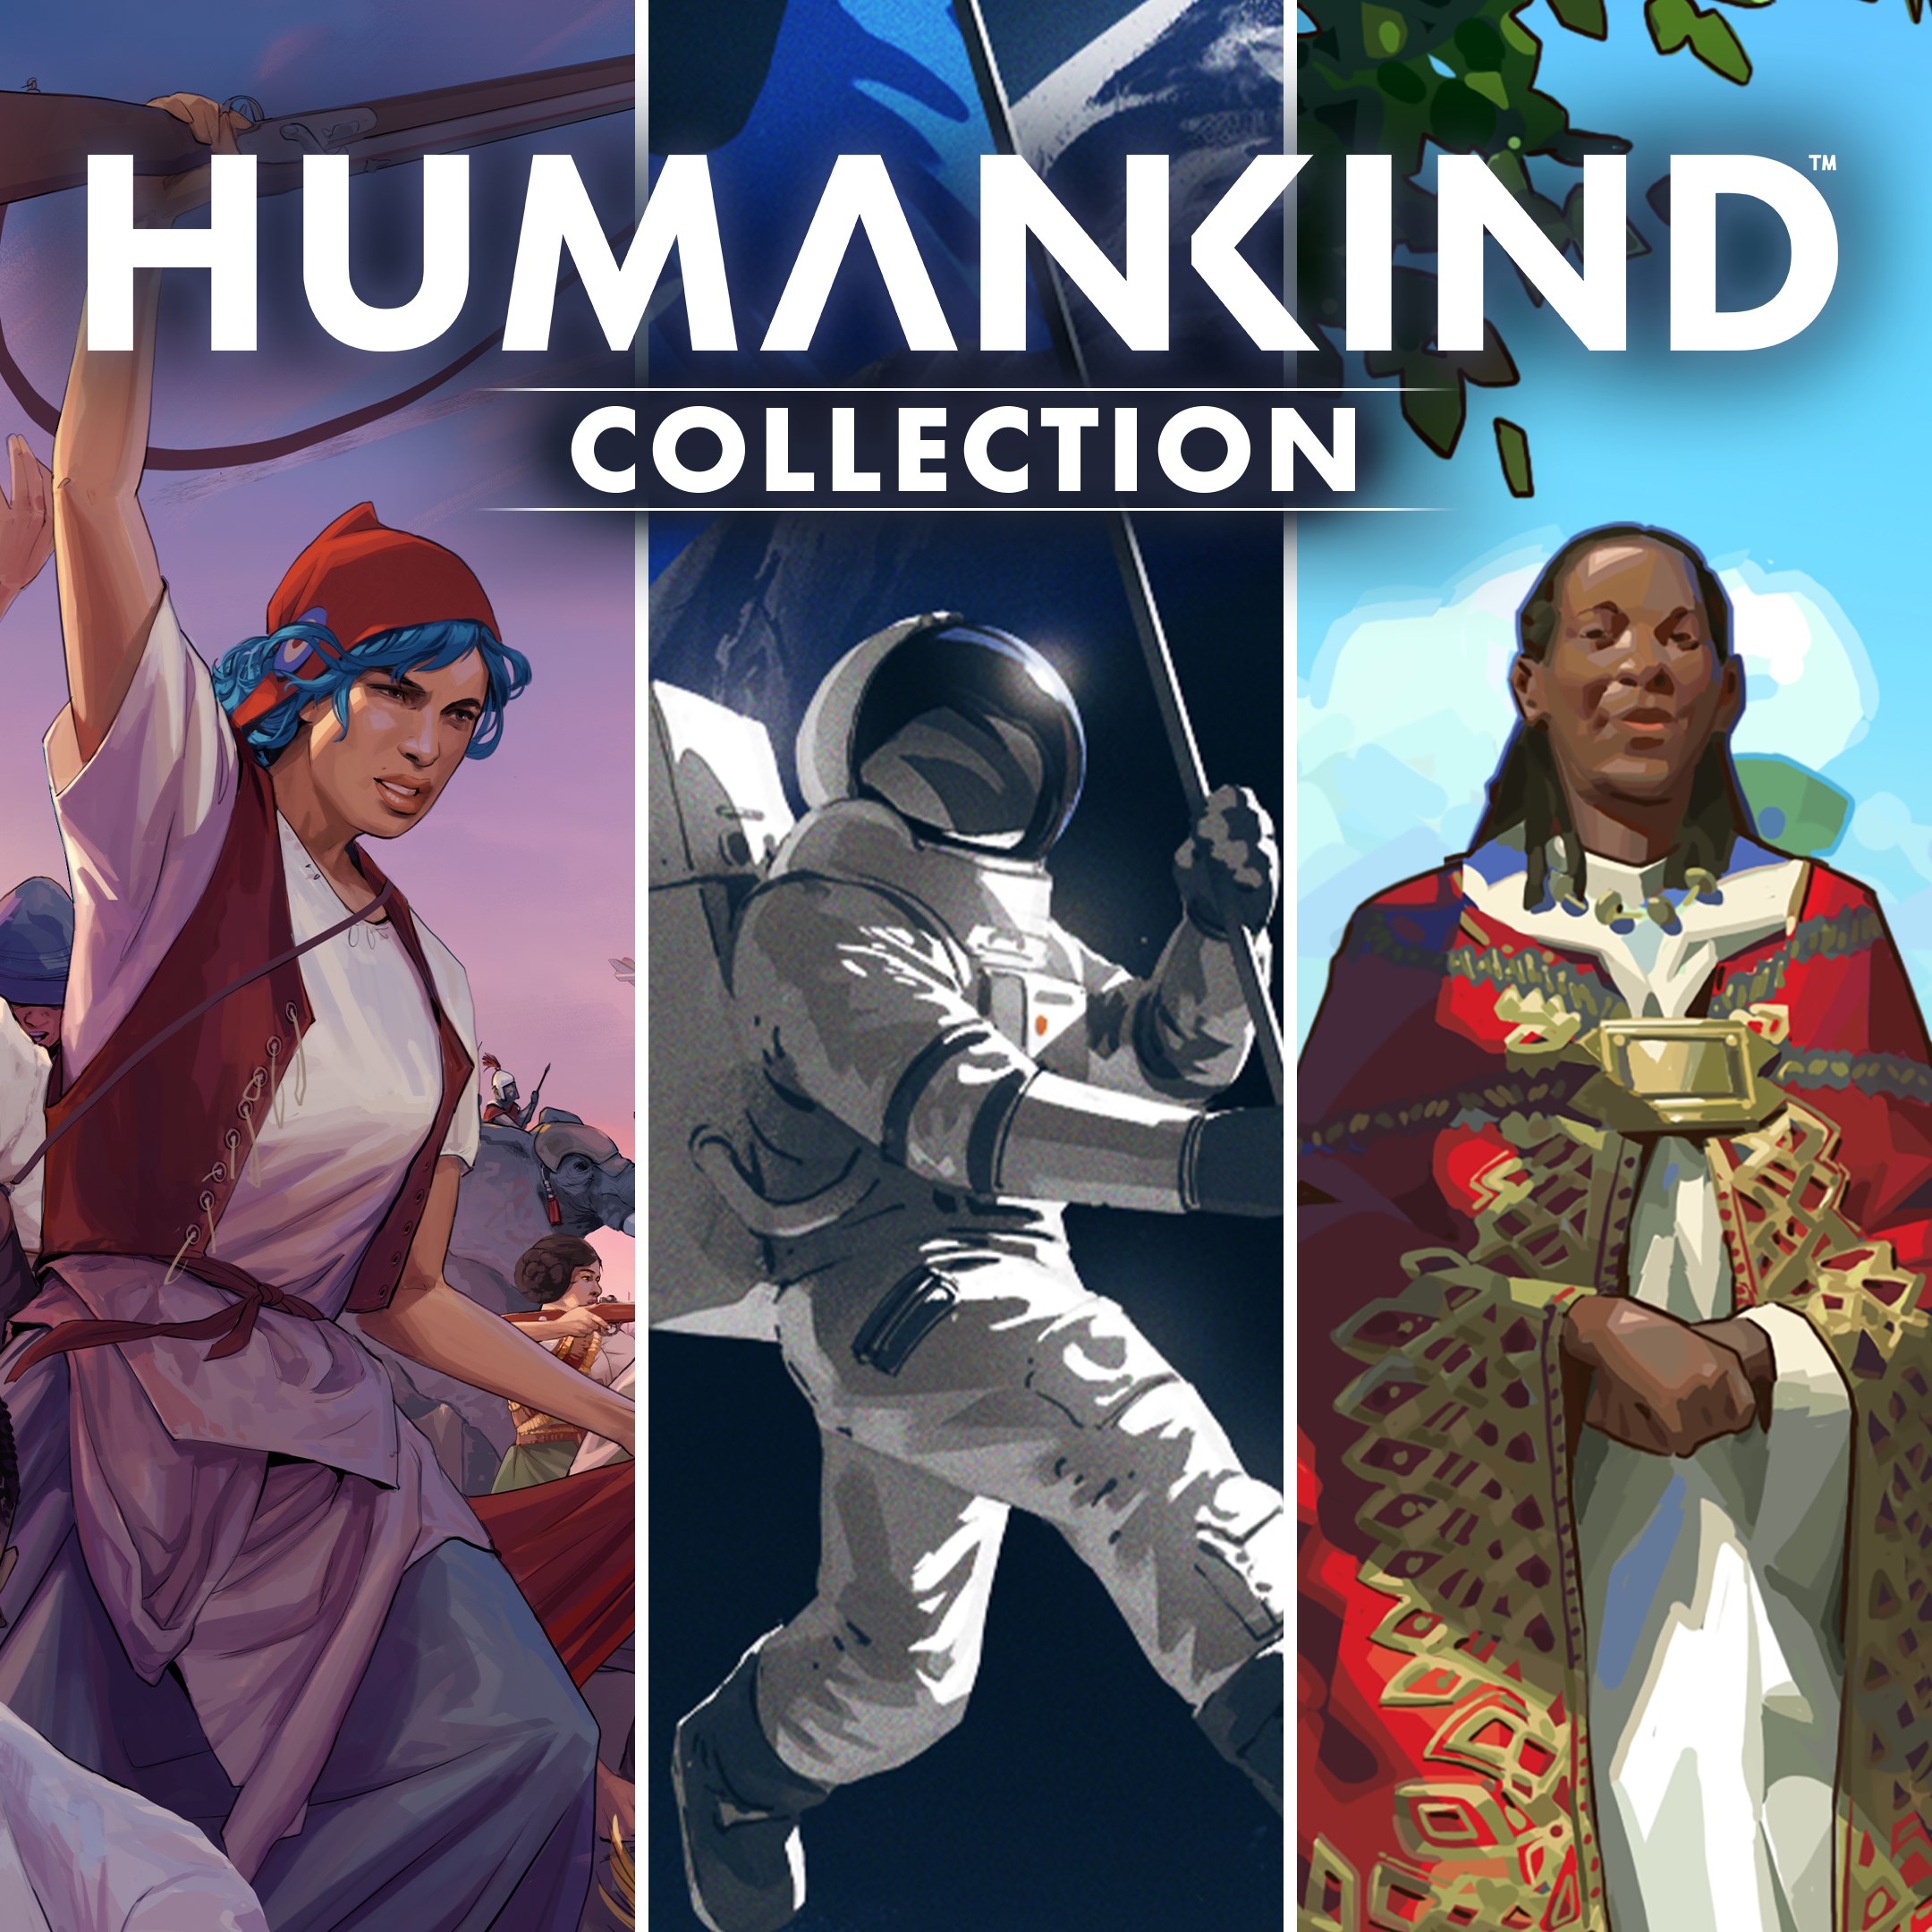 HUMANKIND Collection technical specifications for computer